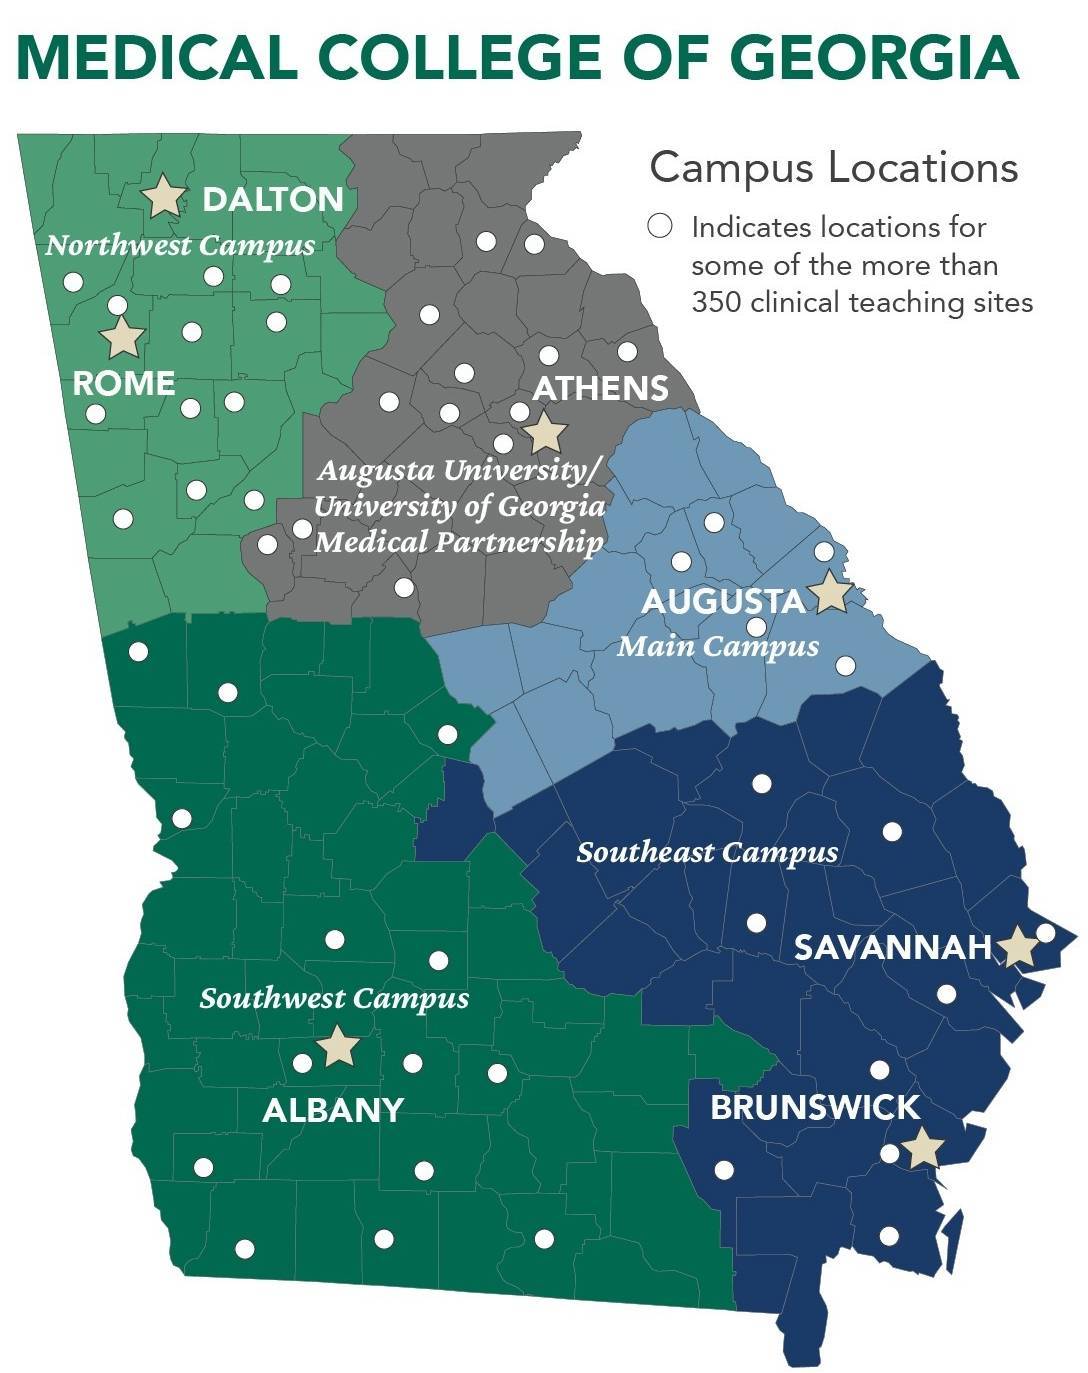 Statewide Campus Locations